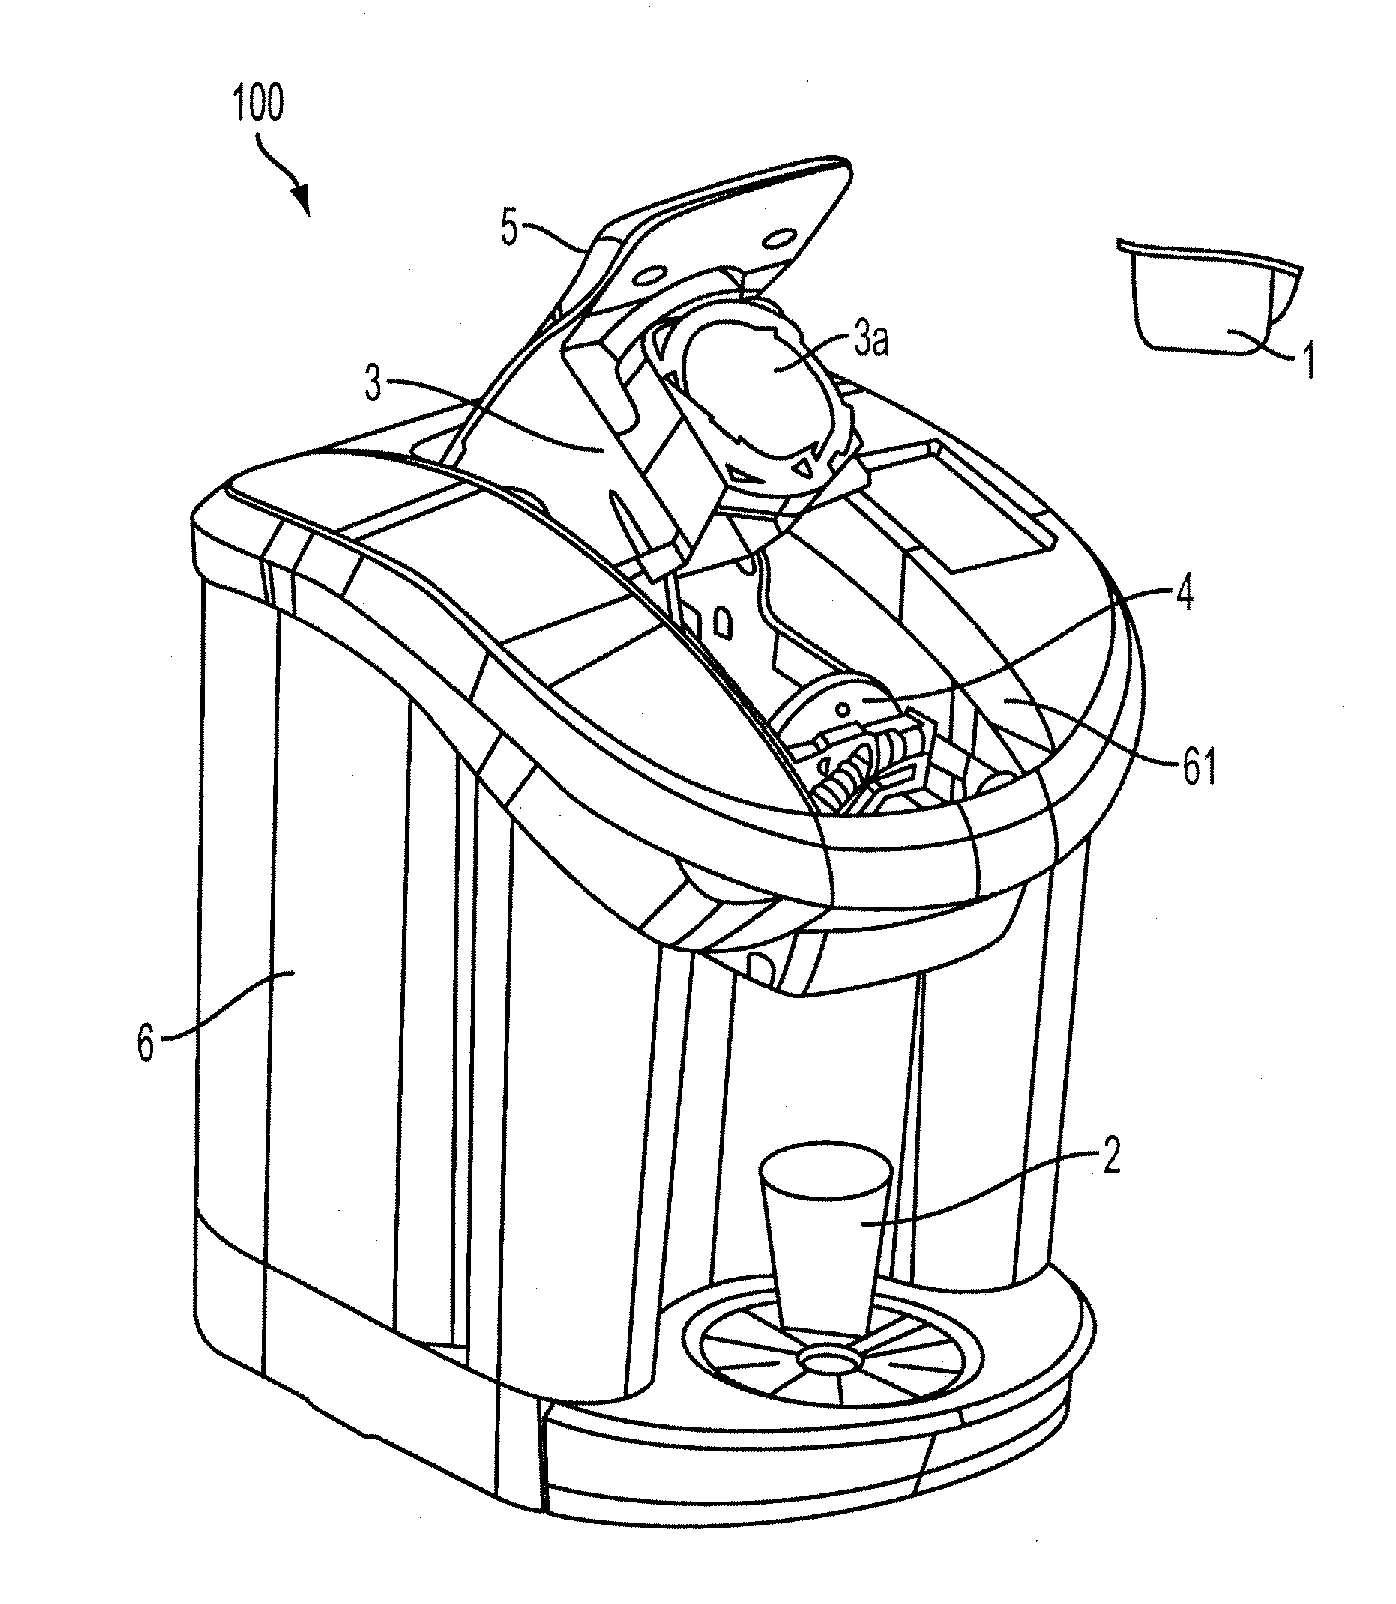 Liquid delivery tank with expansion chamber